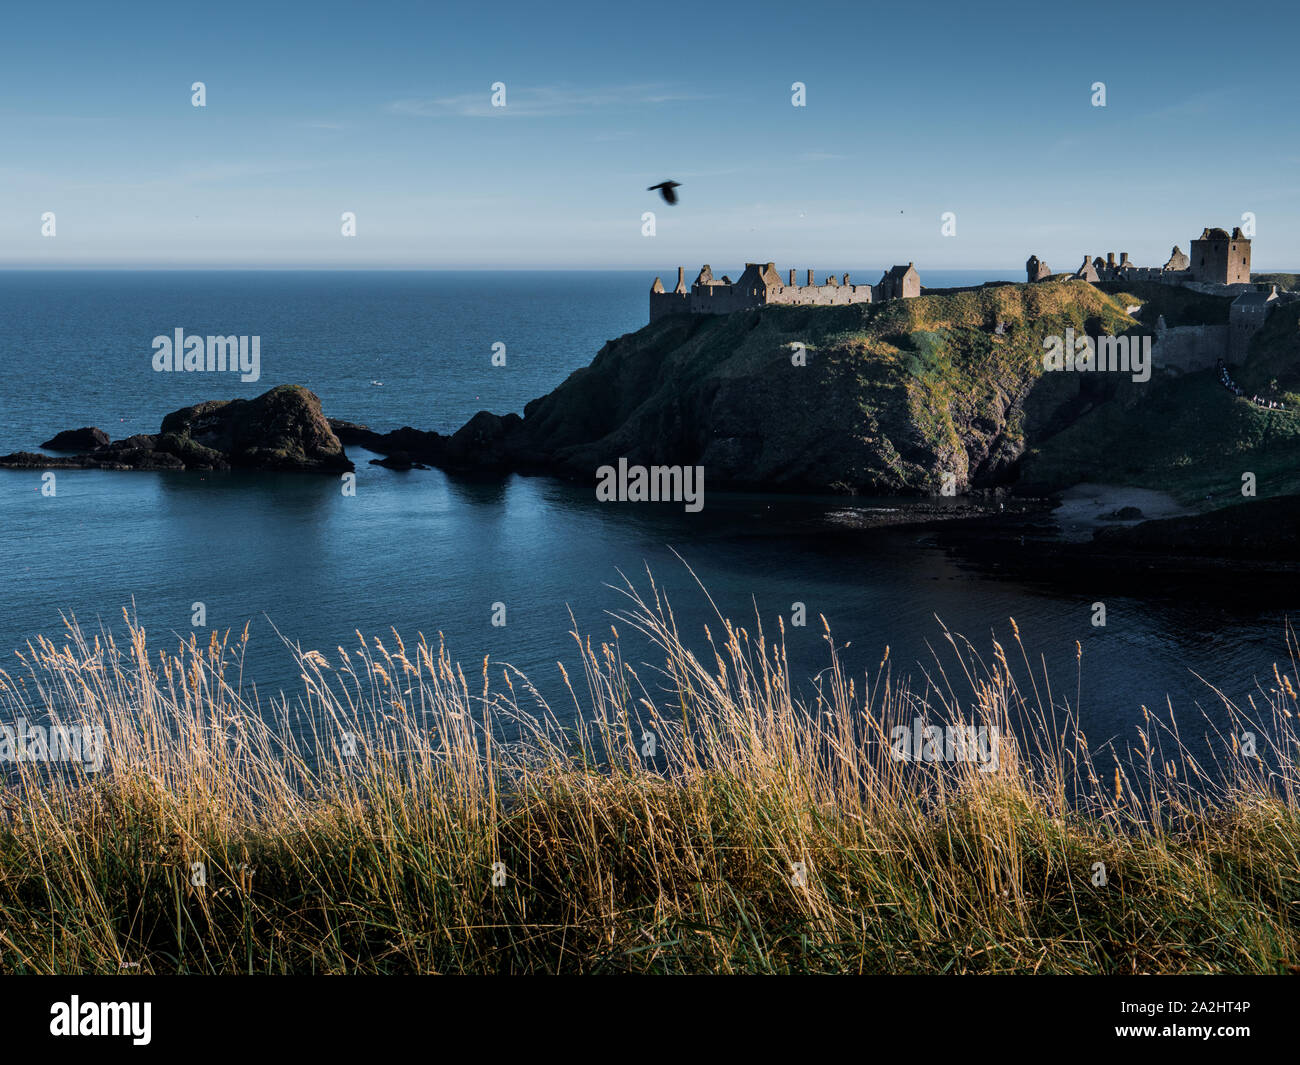 View of the Dunnotar castle. Scottish ruined castle located on an island near the sea. Stock Photo